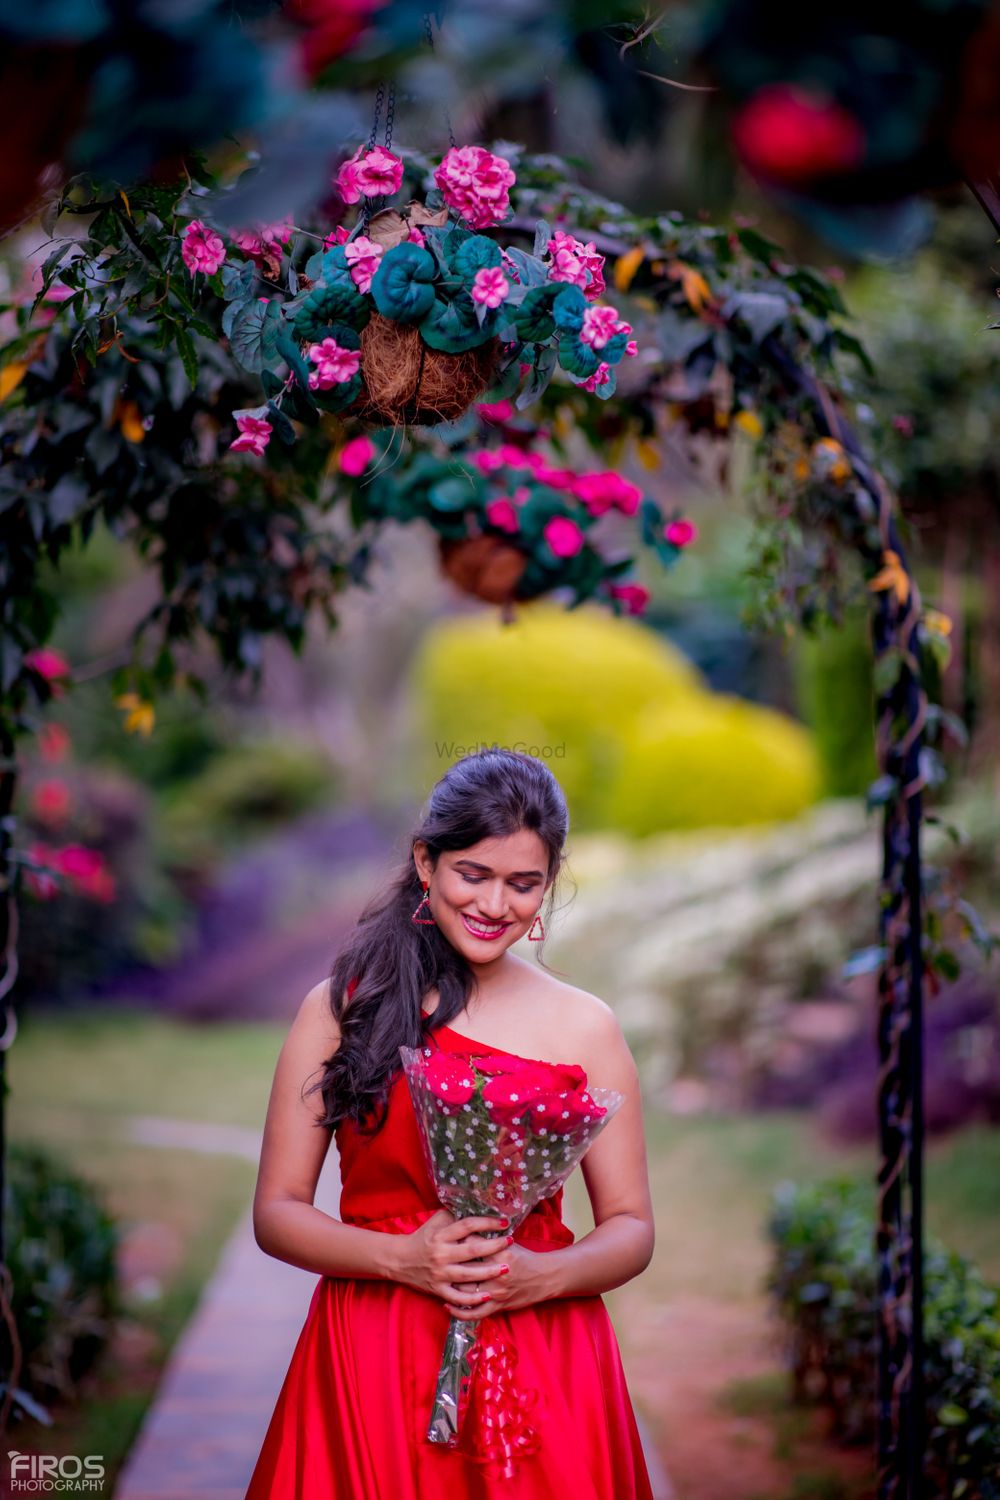 Photo From Sweta & Manish - By FirosPhotography